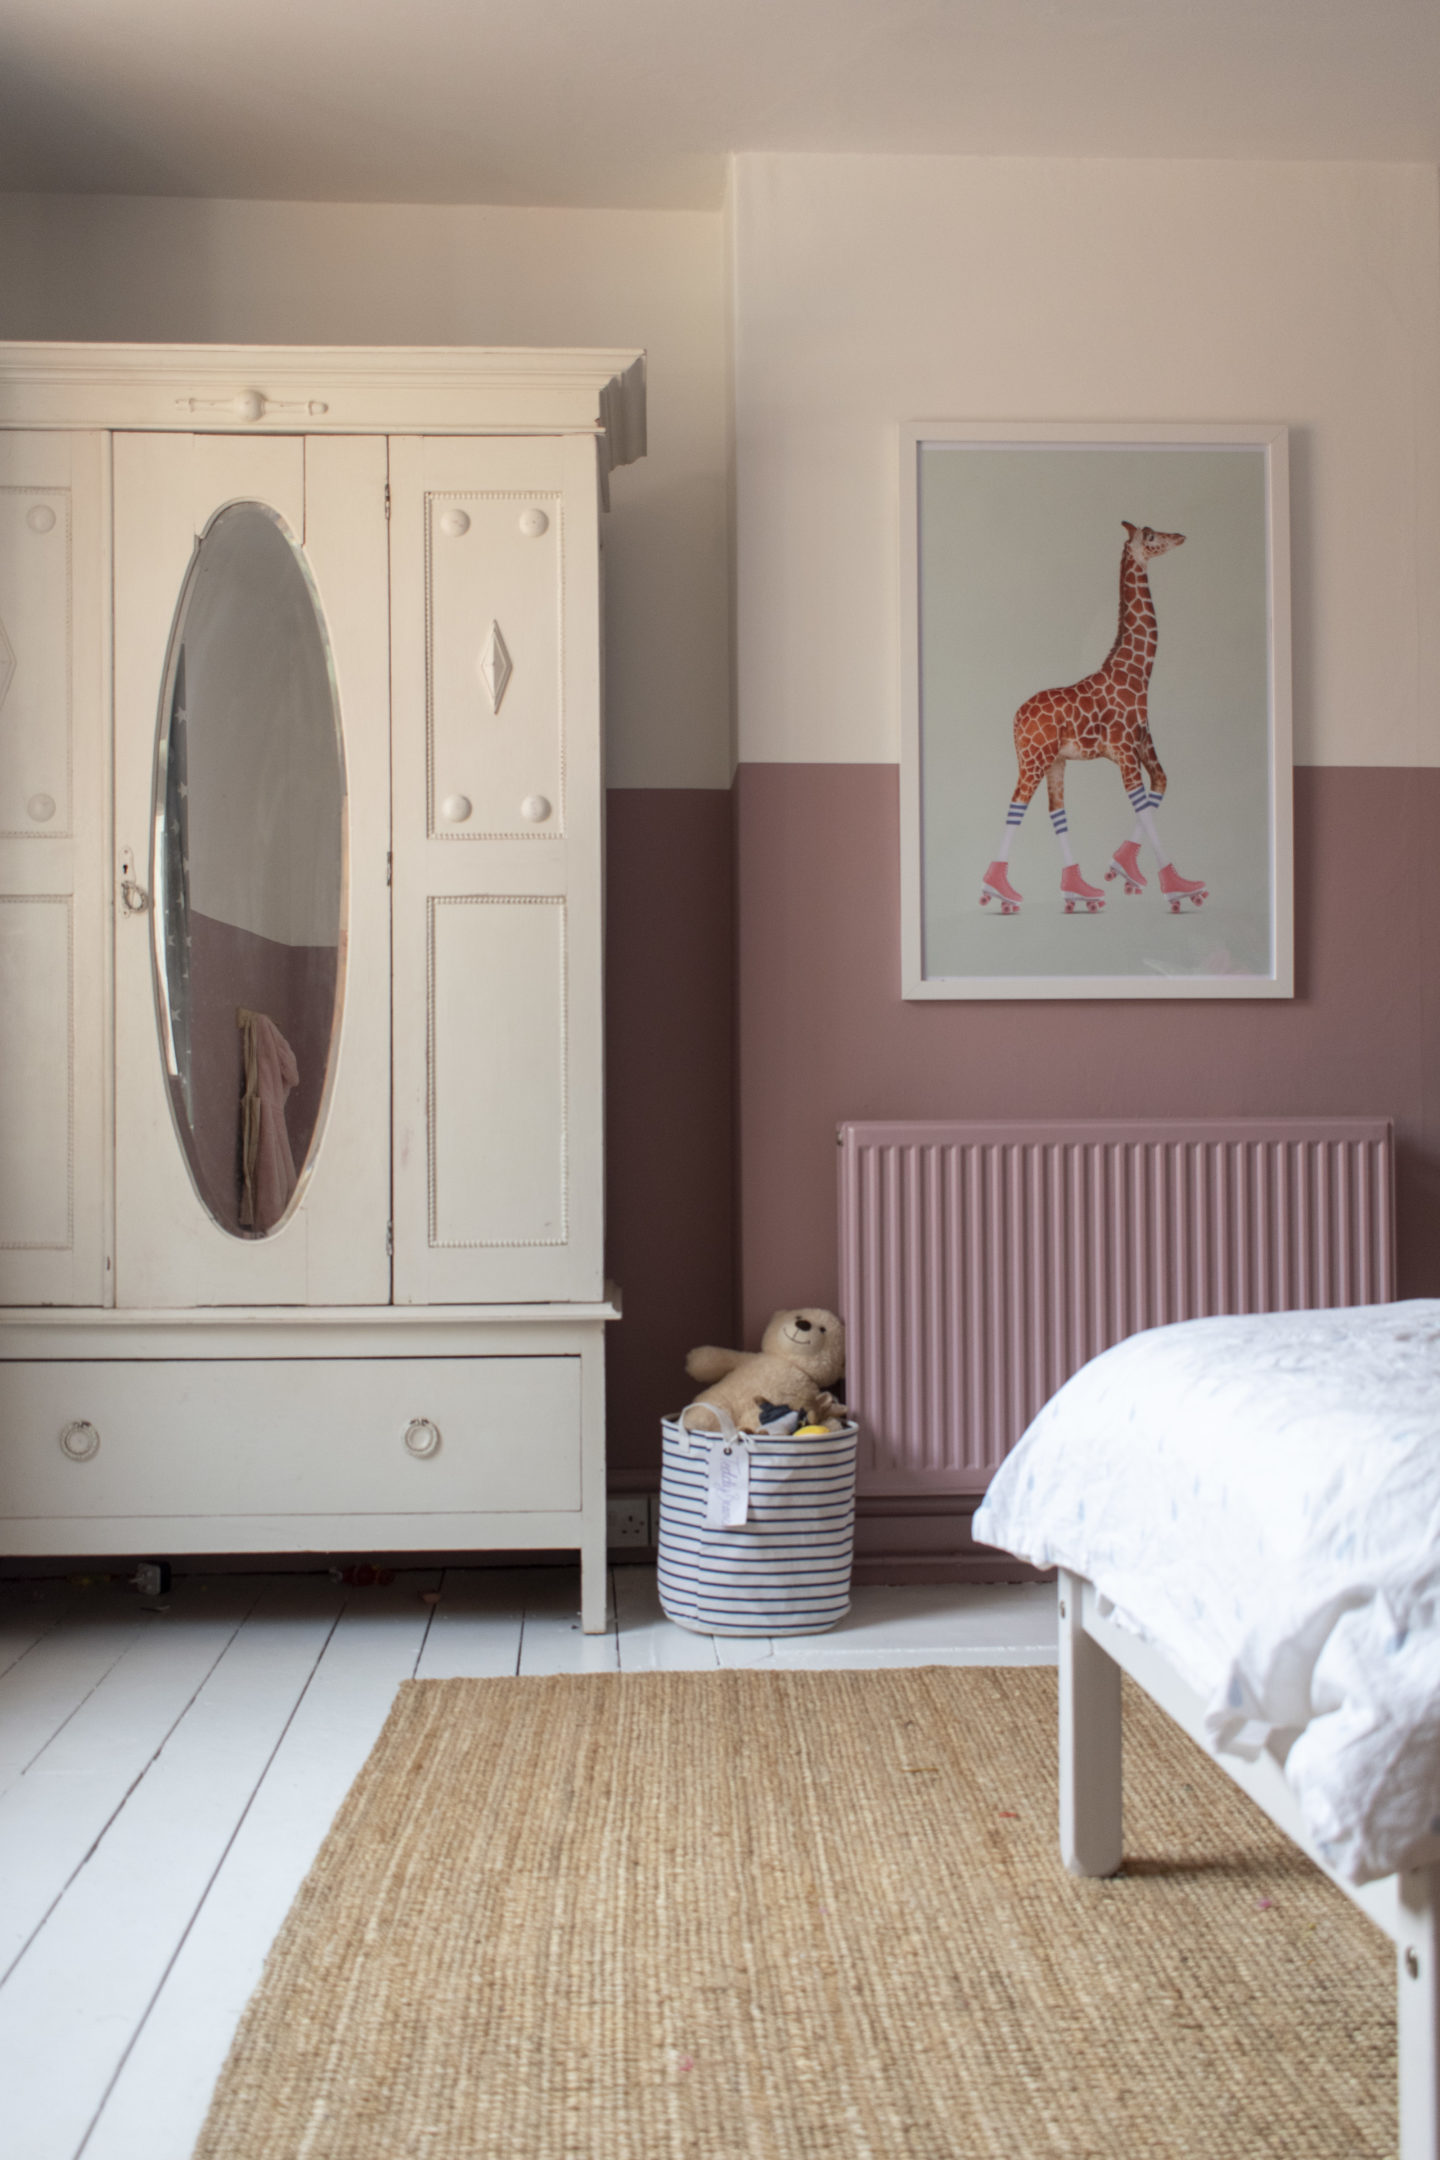 half painted walls in cinder rose farrow and ball